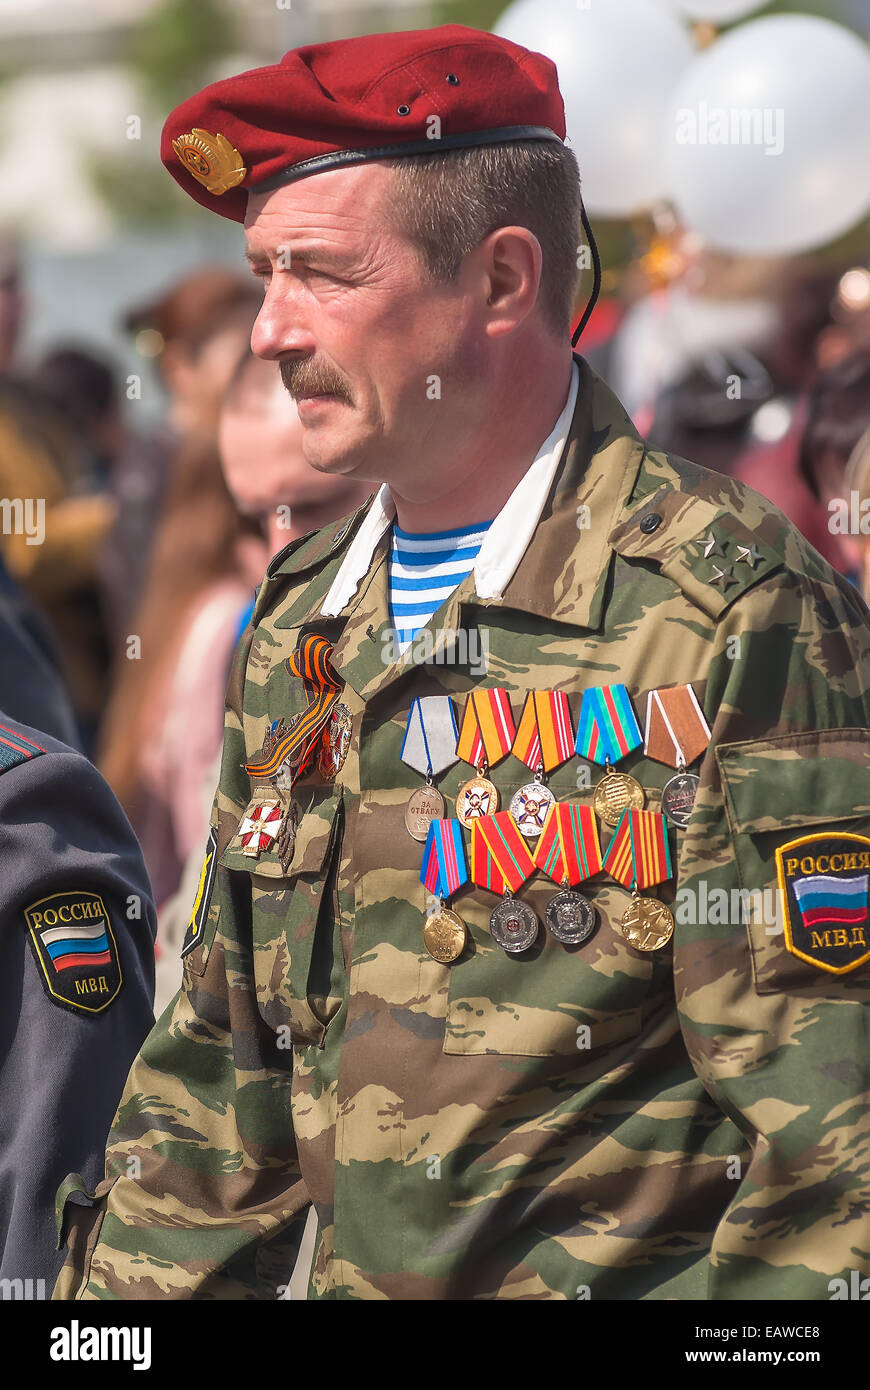 Colonel of police on Victory Day parade Stock Photo